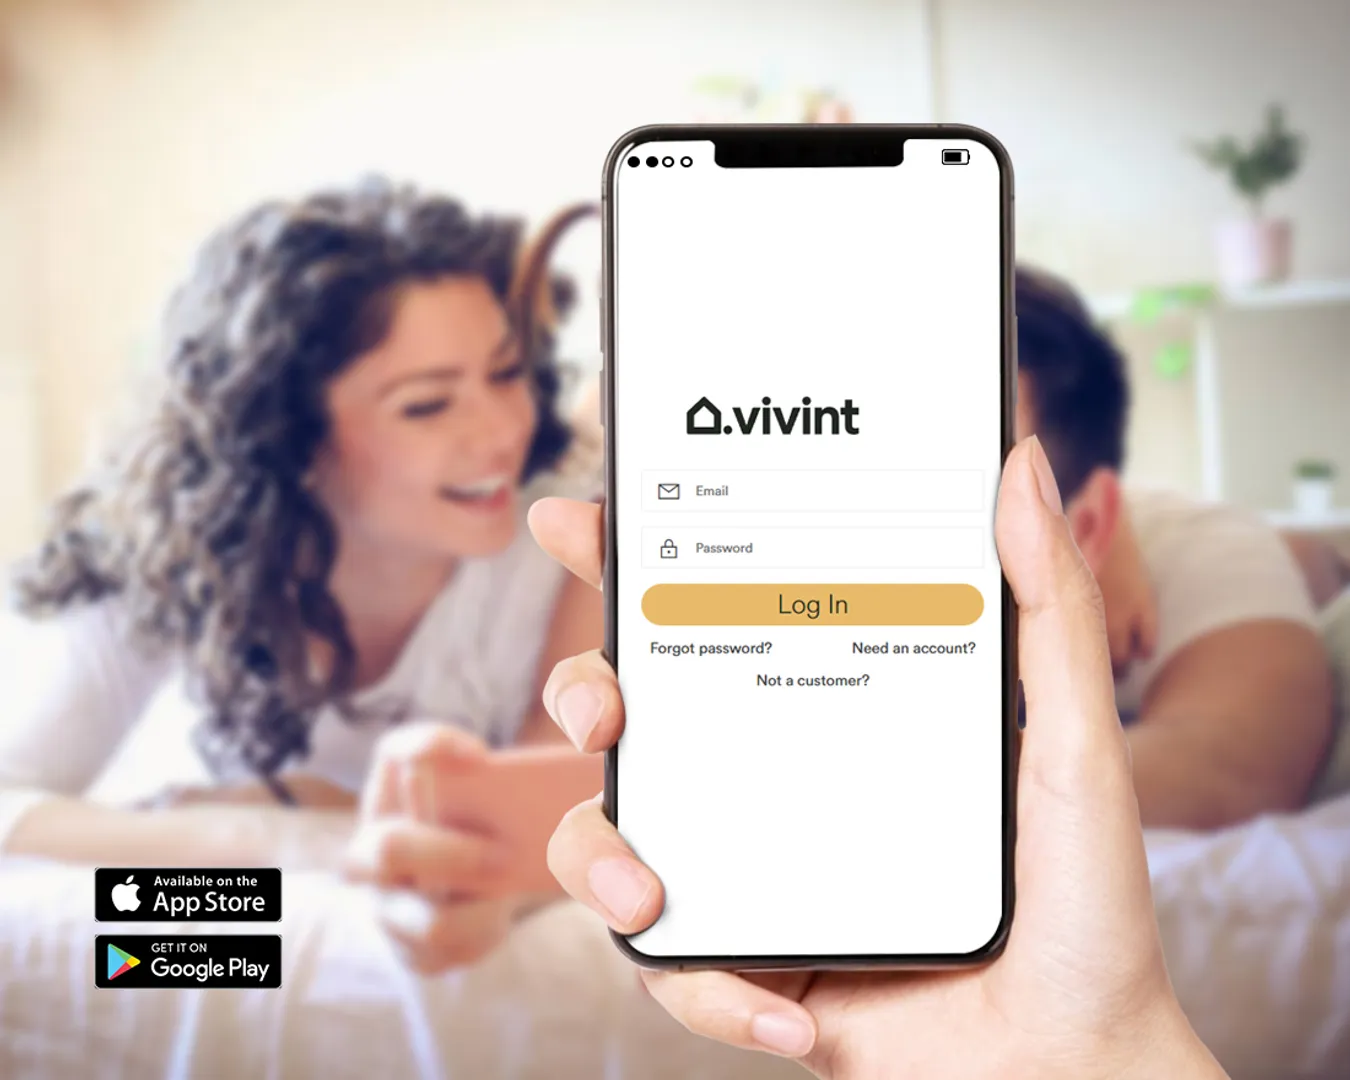 To proceed with the Vivint camera login, you must install the Vivint app. You can install the Vivint app from either Play Store or App Store. Now, open the app and log into your account. If you don’t have an account, you can create one from the app. After logging into the app, you can add the camera to the app and configure the settings. From the app, you can watch the live stream from anywhere and anytime.

https://loginvivint.com/